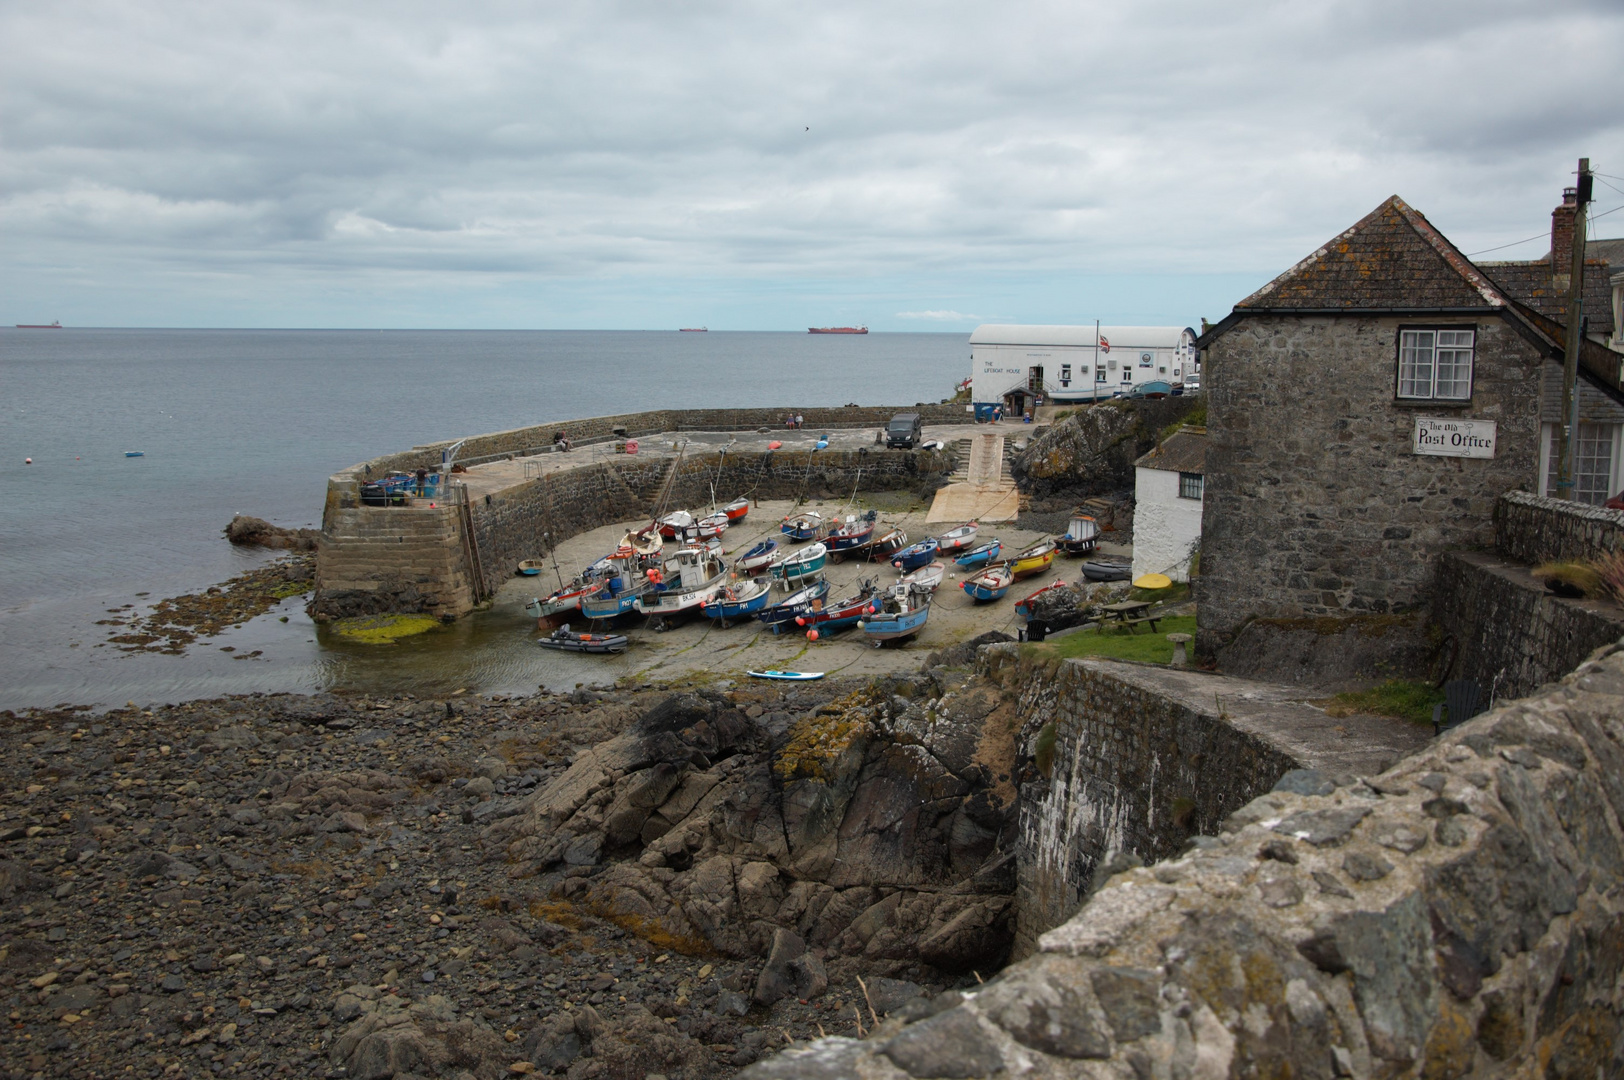 Coverack Harbour at low tide